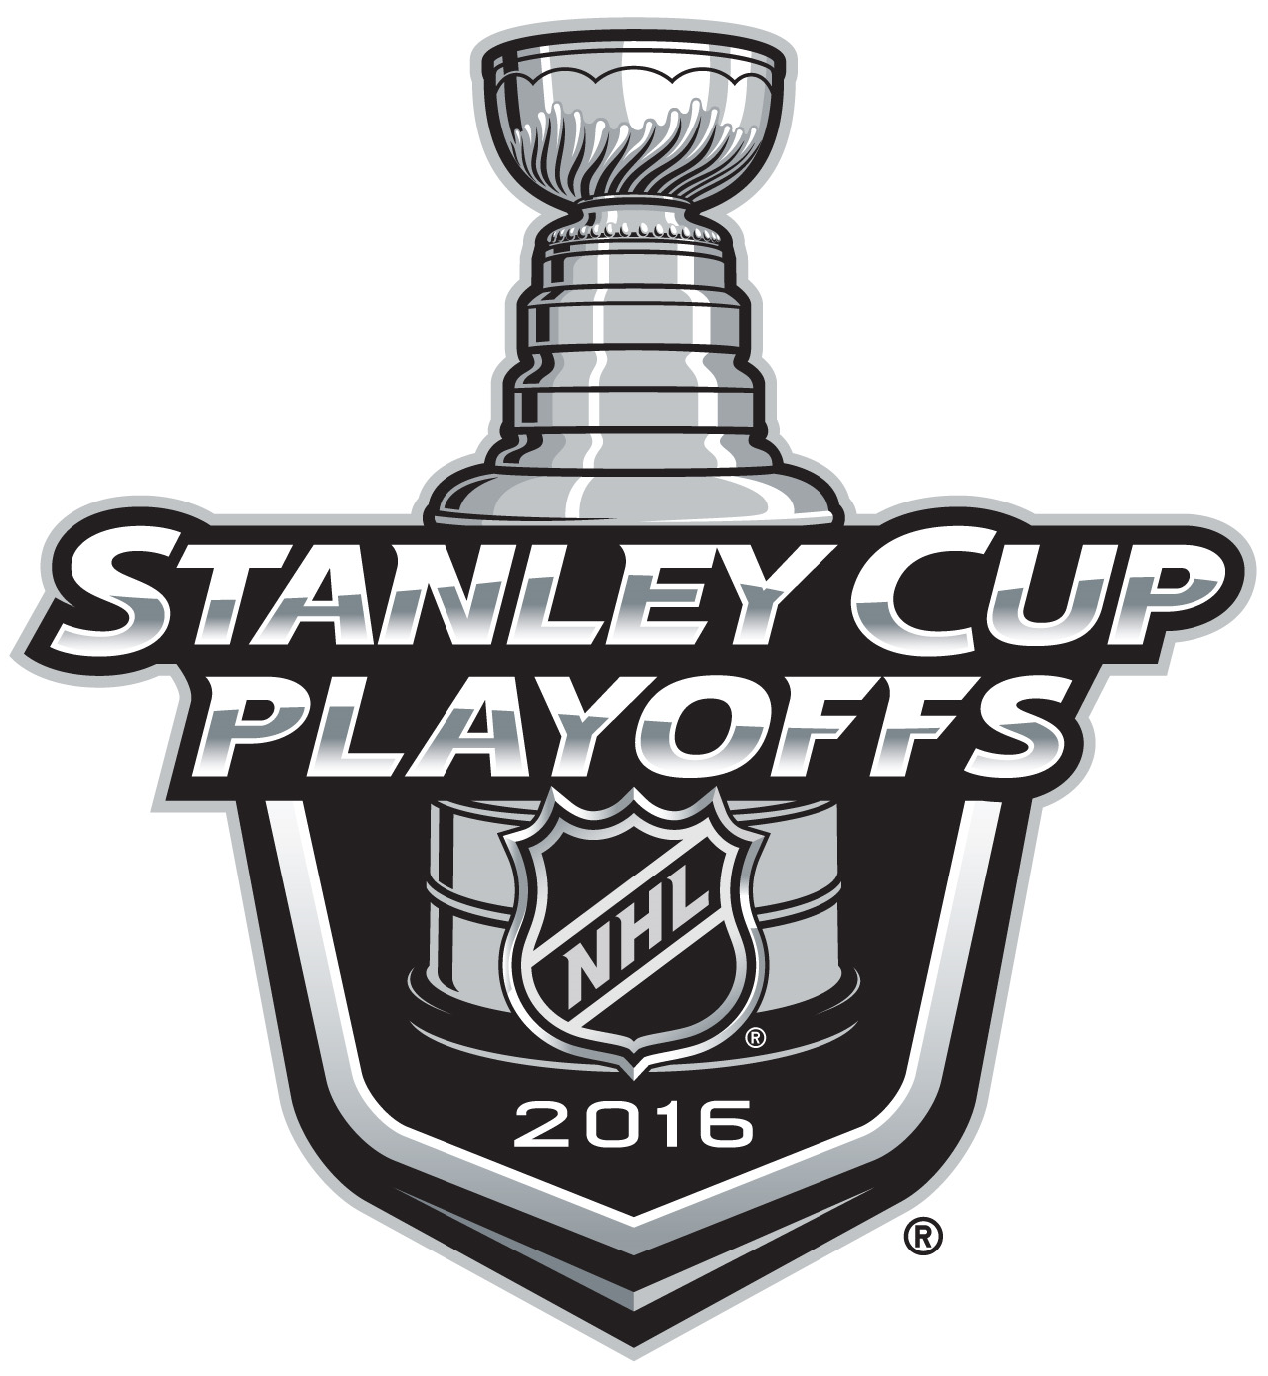 Stanley Cup Playoffs 2016 Primary Logo iron on transfers for clothing